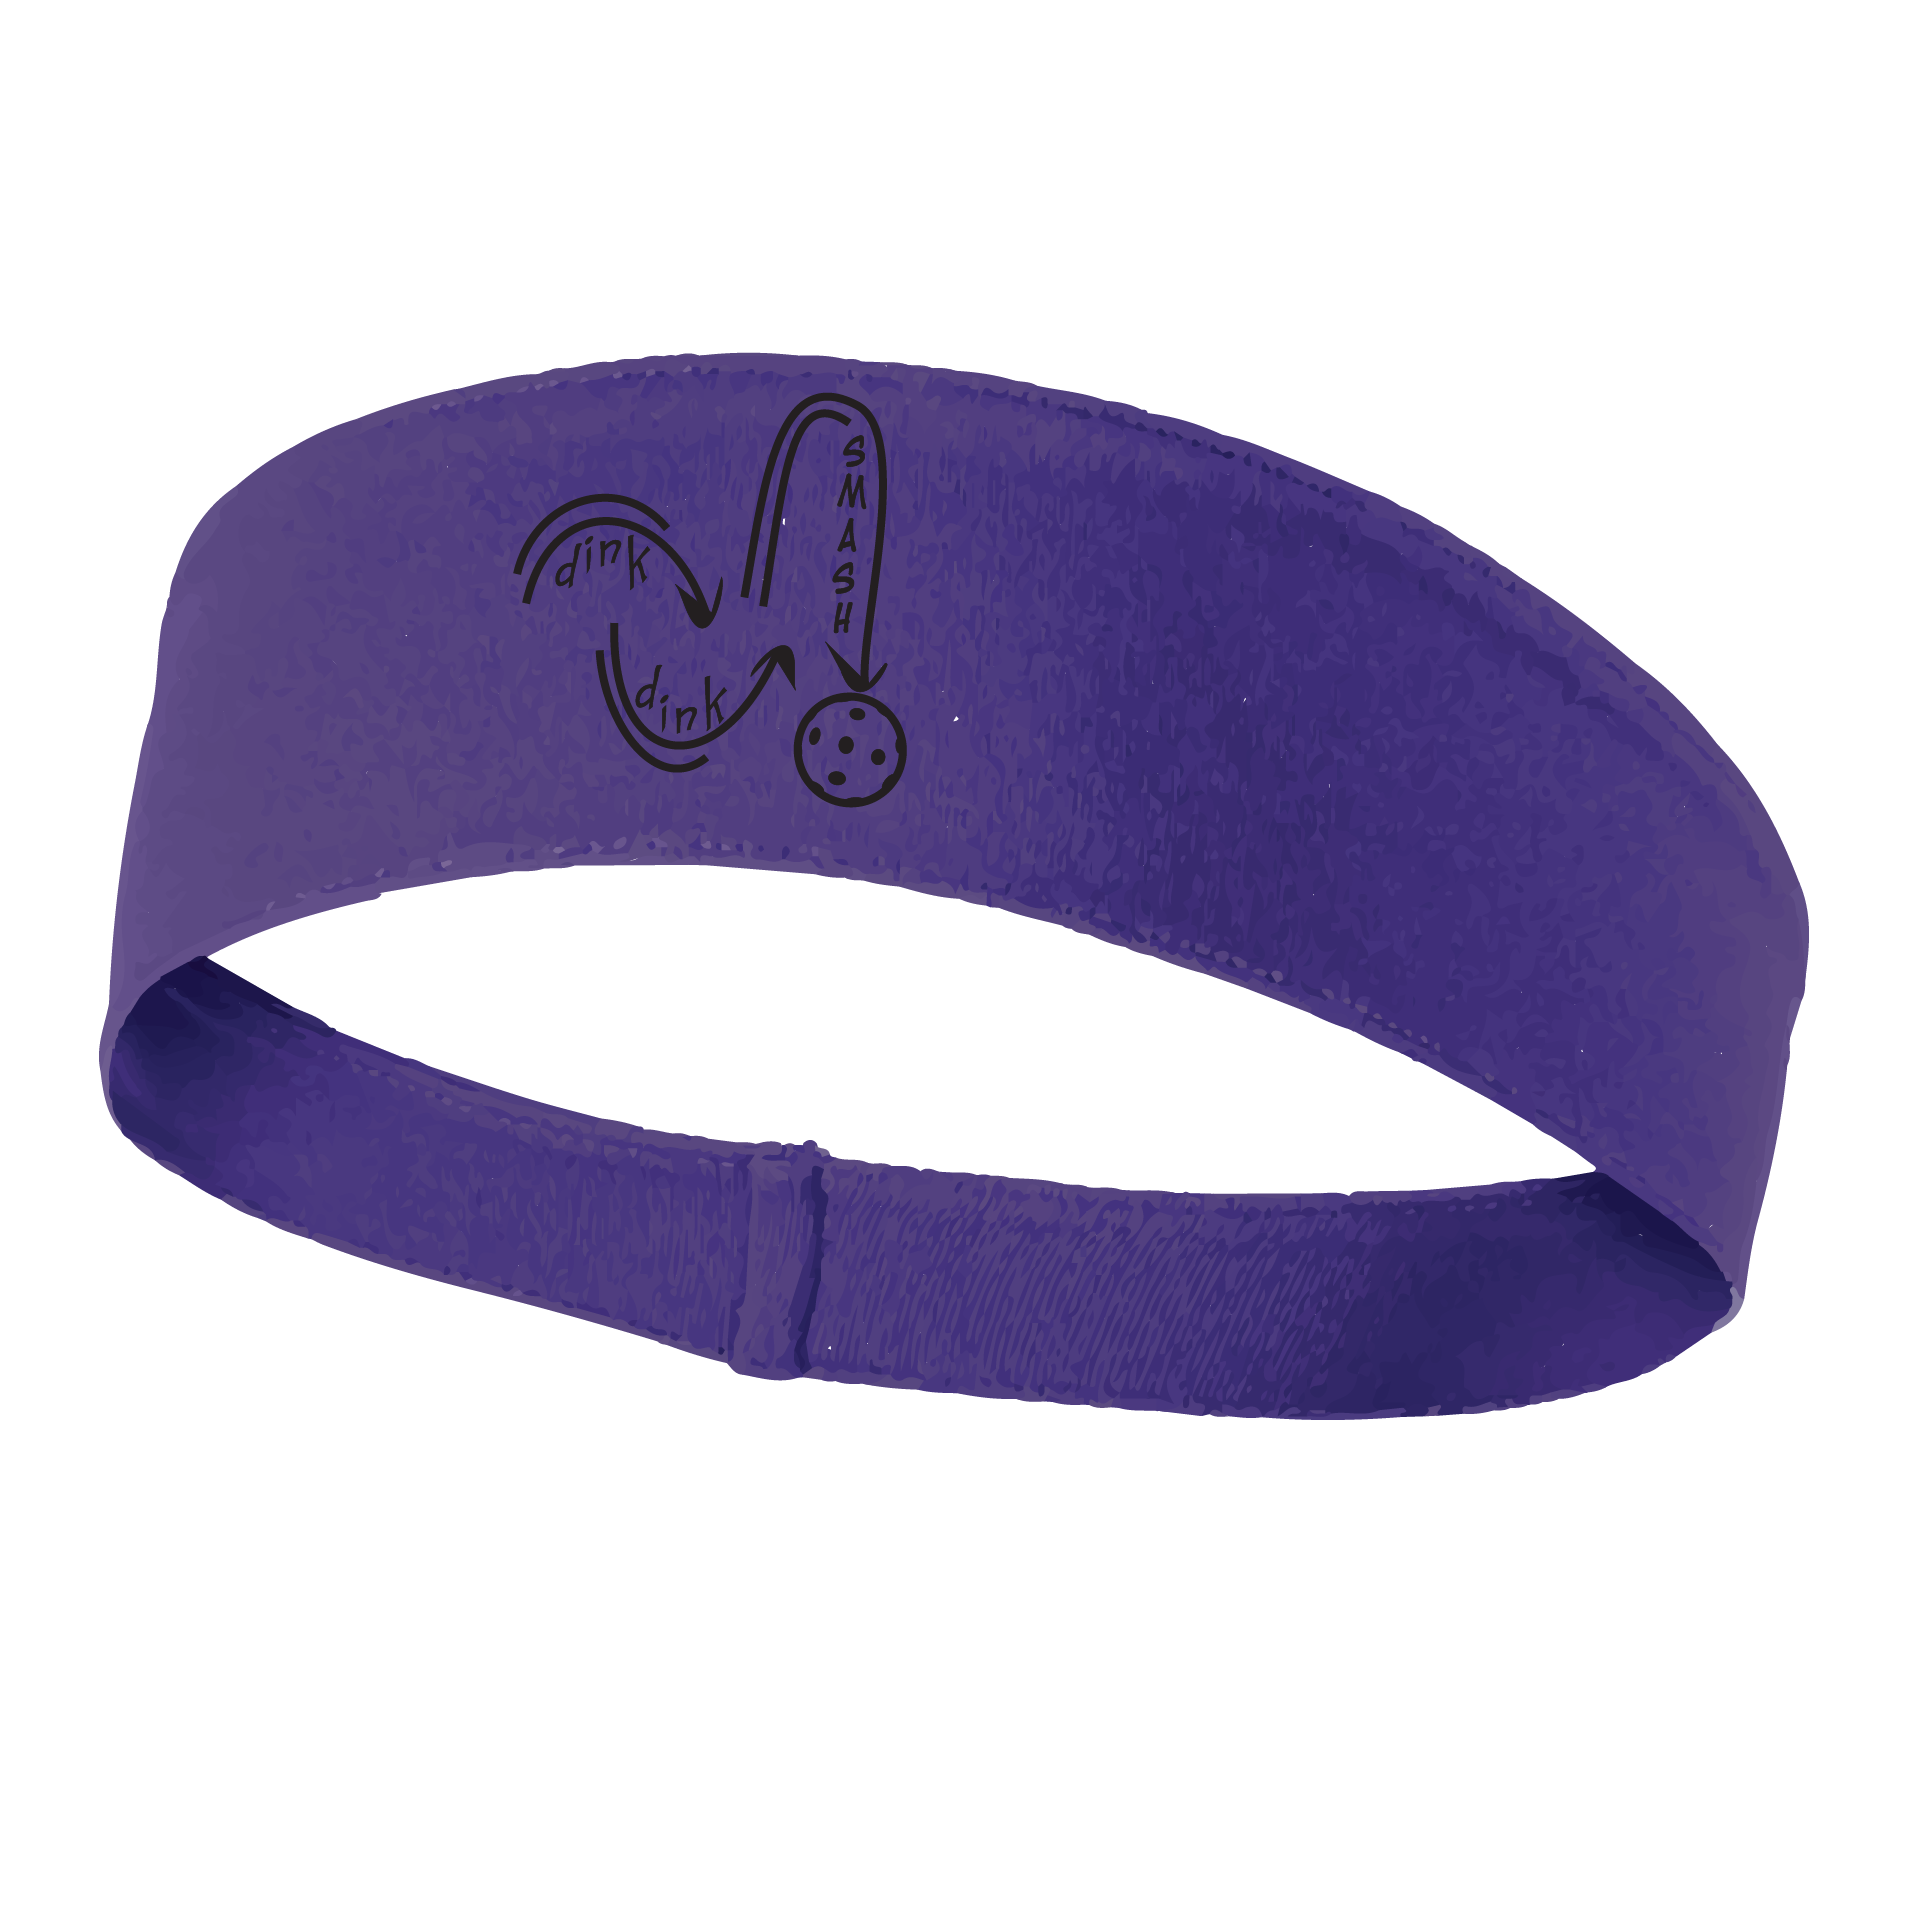 Pickleball Design: Dink Dink Smash in Black  This fun, pickleball designed, moisture-wicking headband narrows in the back to fit more securely. Single-needle top-stitched edging. These headbands come in a variety of colors. Truly shows your love for the sport of pickleball!!